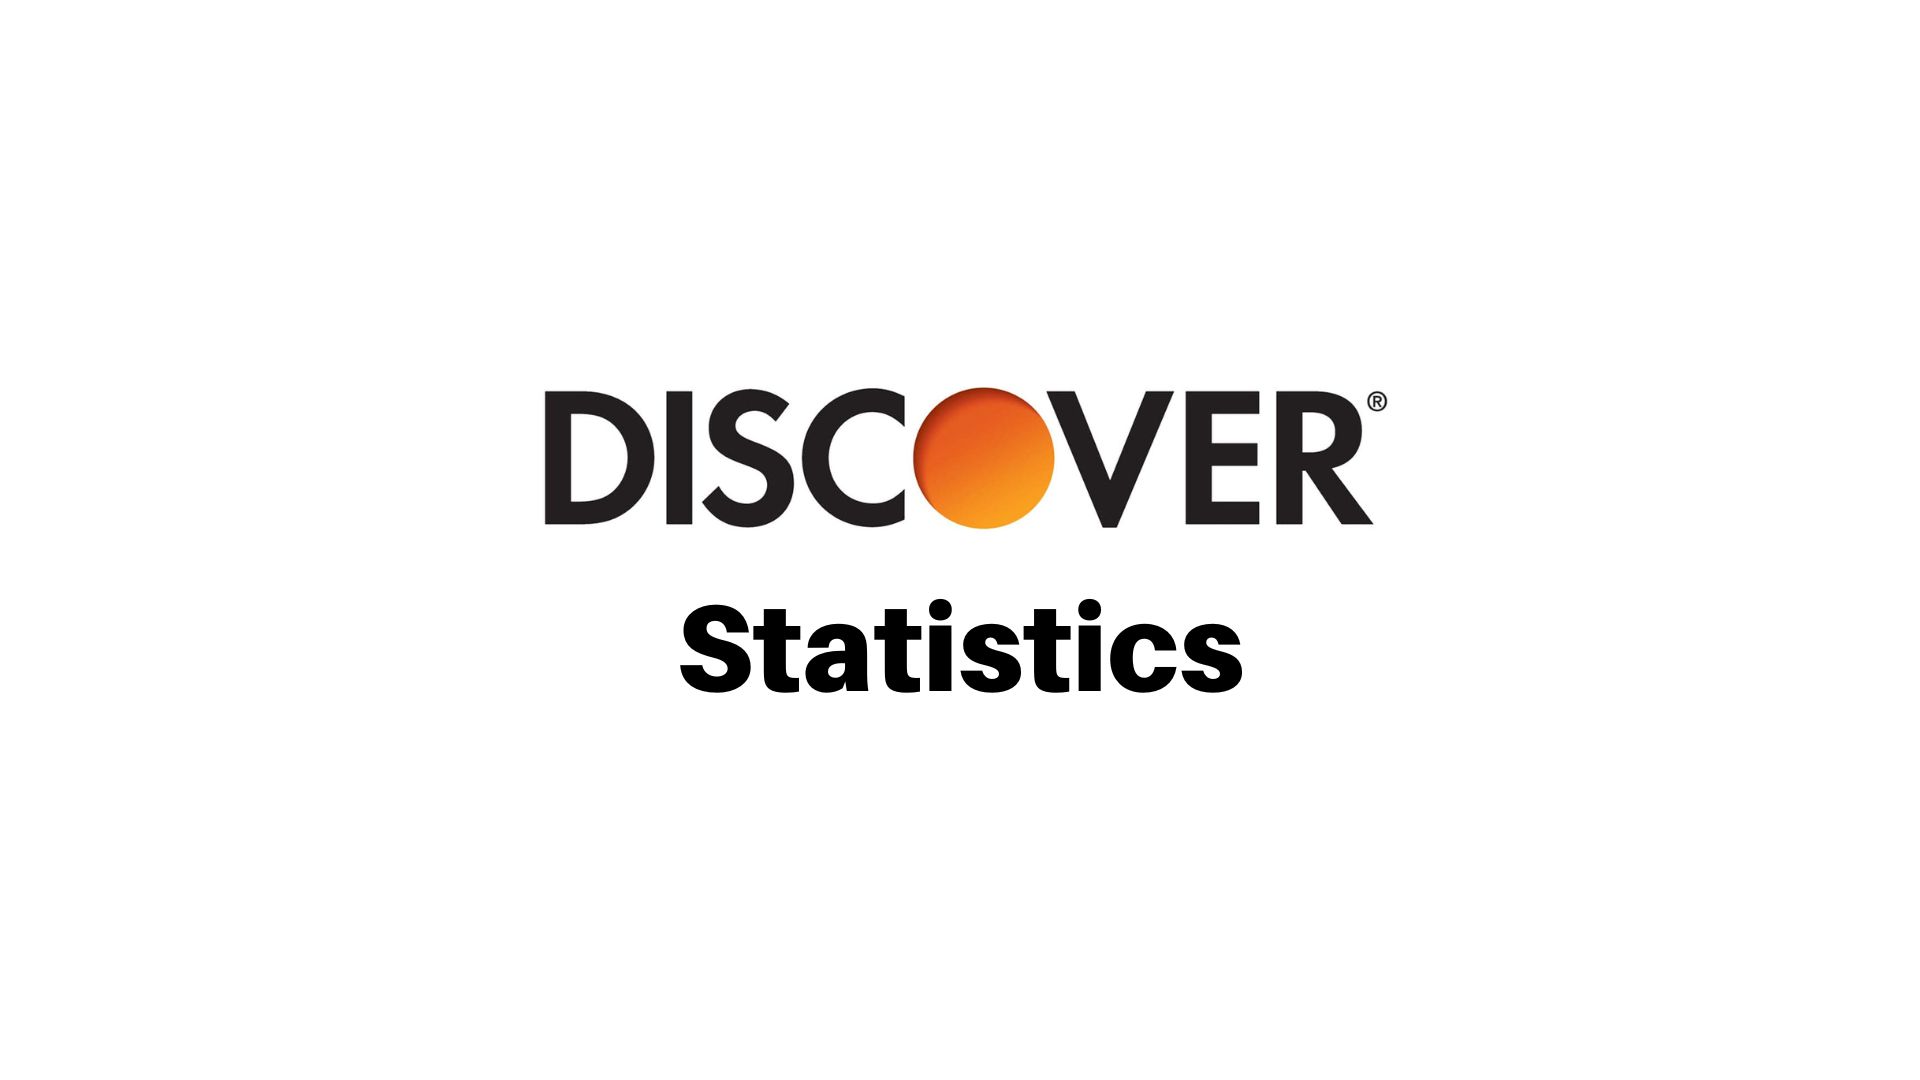 Crucial Discover Statistics To Understand Its Growth In The Current Digital Payment Landscape